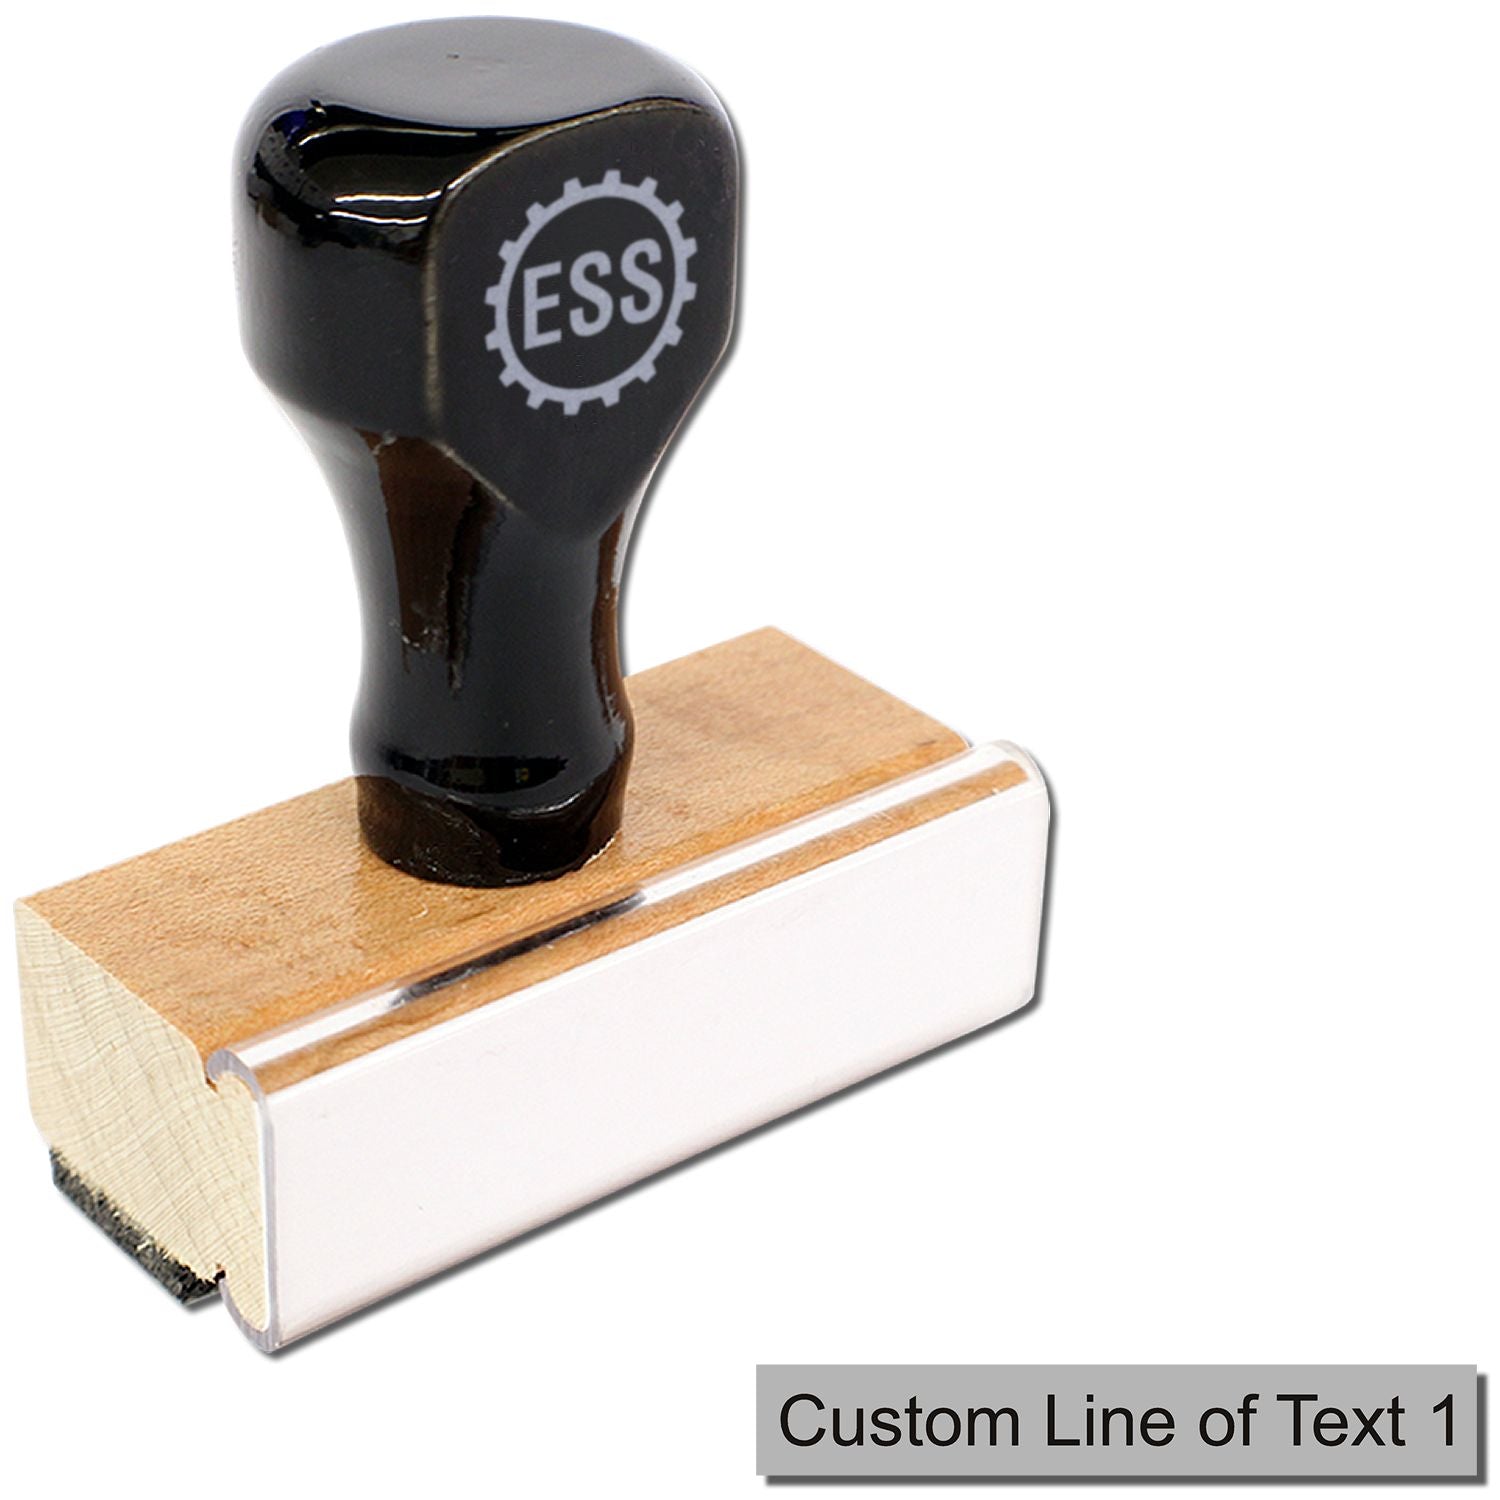 A custom rubber stamp that can display a one-line text image after stamping from it.